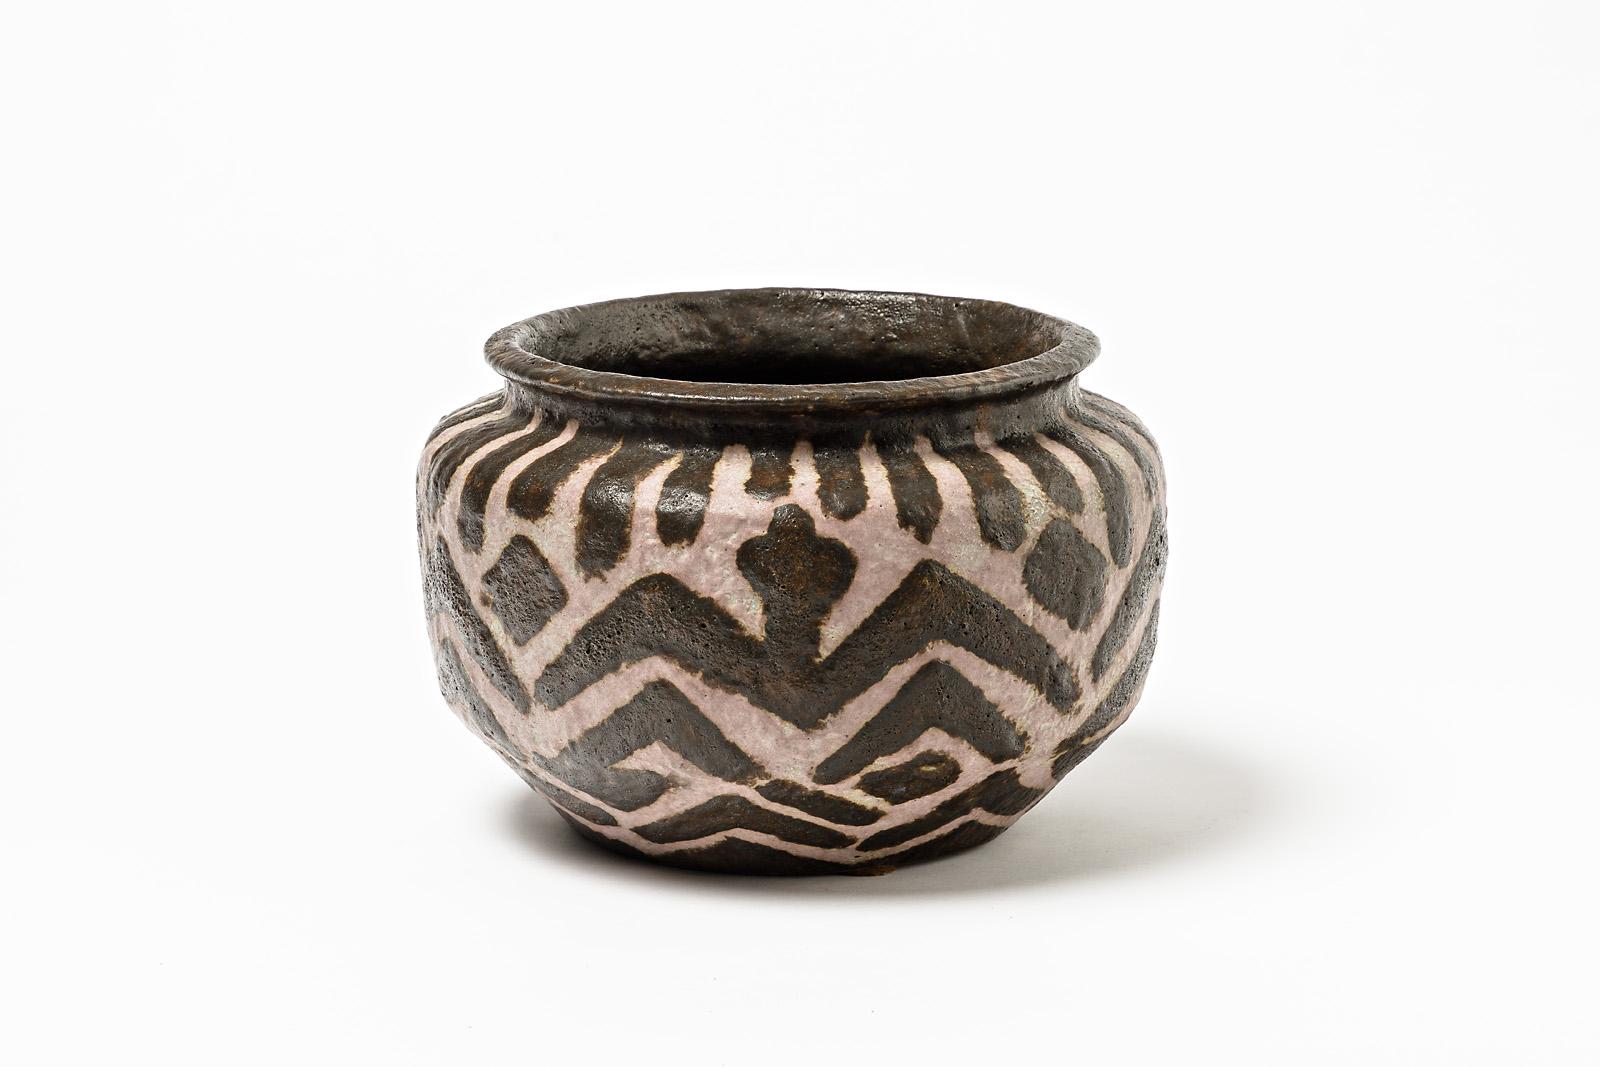 Joseph Massé 1878-1946 (in relation with Jean Carriès)

circa 1930, signed under the base.

Massive Africanist ceramic vase by the French artist. Rare and important vase with rich decorations.

Elegant black and pink colors.

In the style of